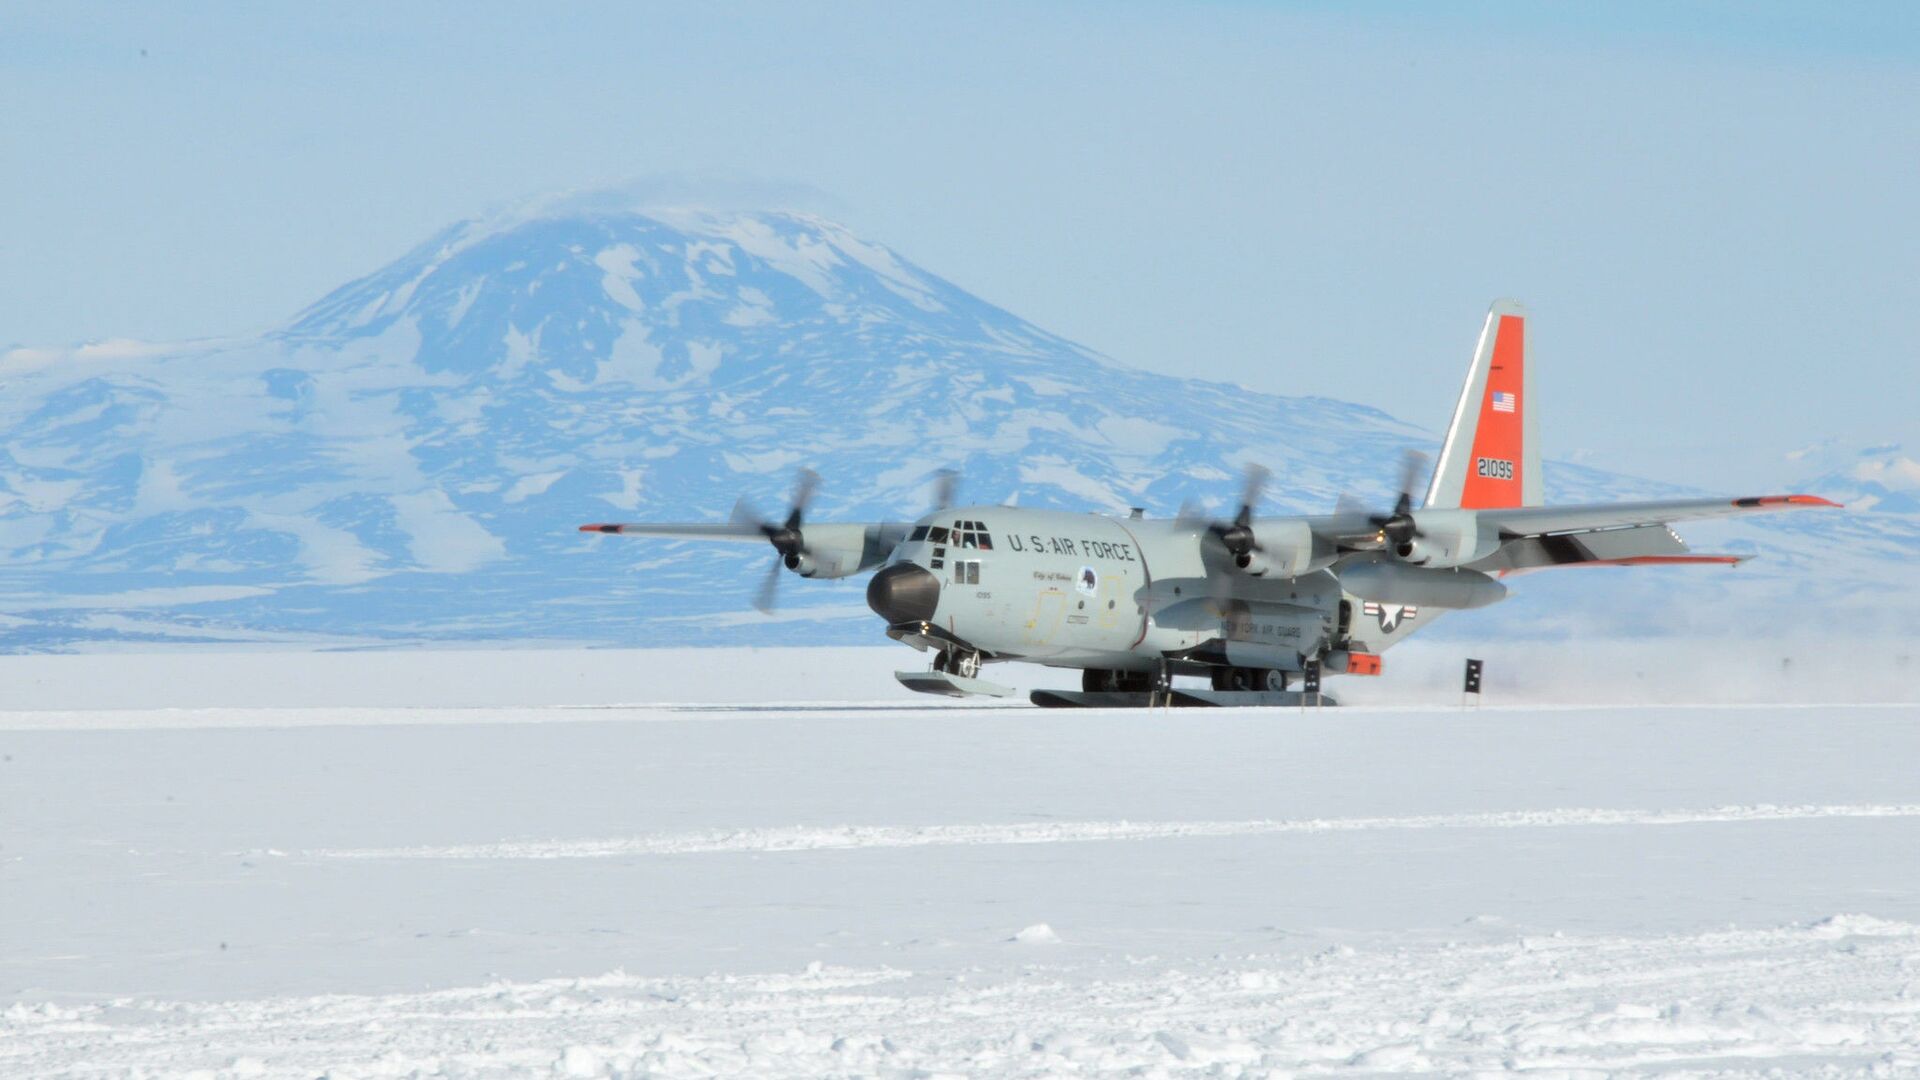 An LC-130 Skibird from the New York Air National Guard's 109th Airlift Wing in Scoita, New York, at Camp Raven, Greenland, on June 28, 2016 - Sputnik International, 1920, 21.03.2023